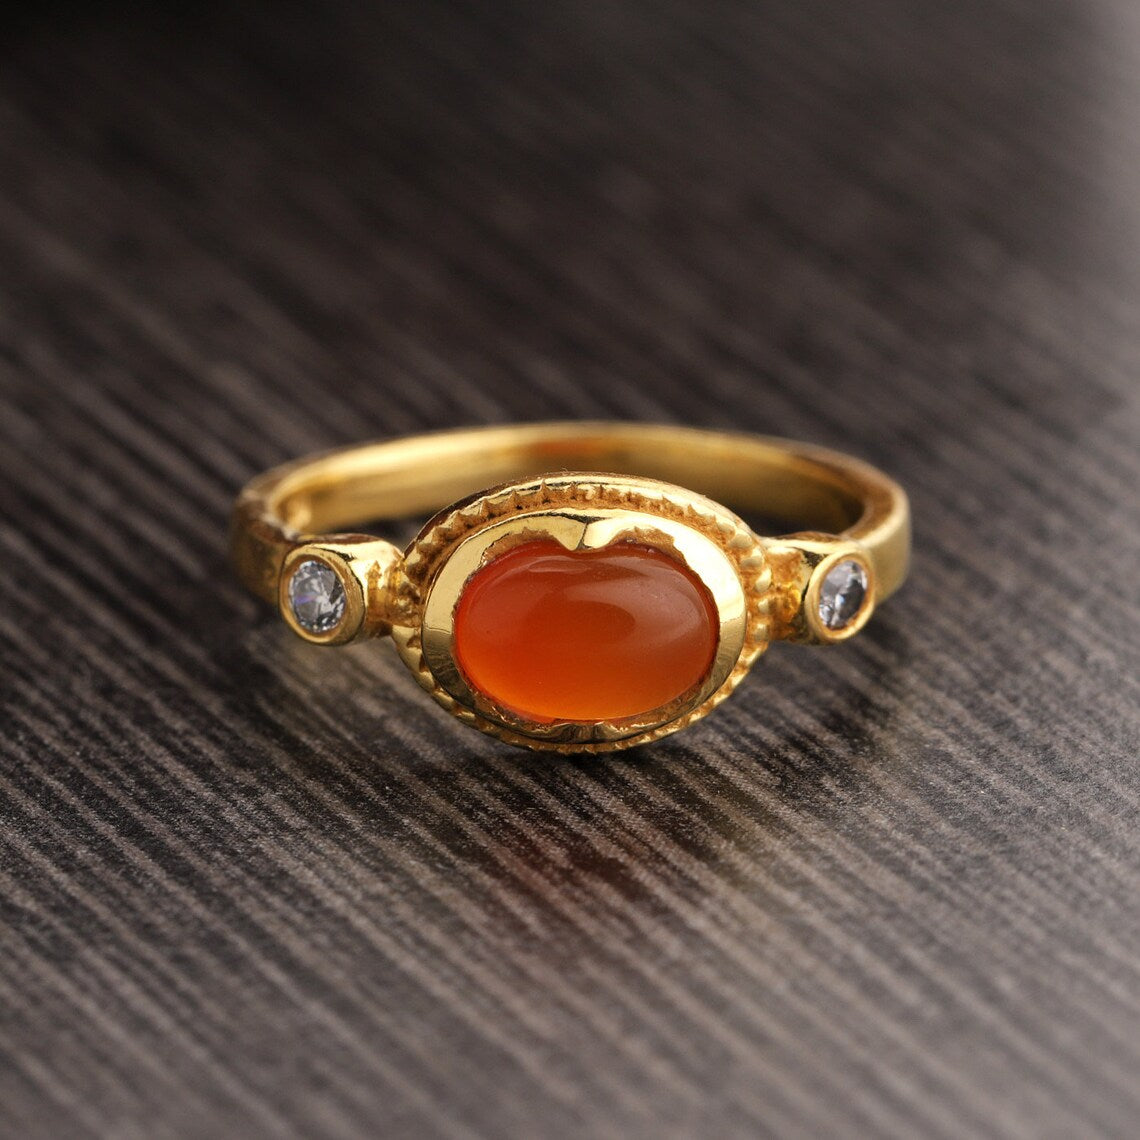 Natural Carnelian Ring, Silver Ring Gold Plated, Oval Gemstone Ring, CZ Ring, Handmade Ring, Statement Ring, August Birthstone Ring